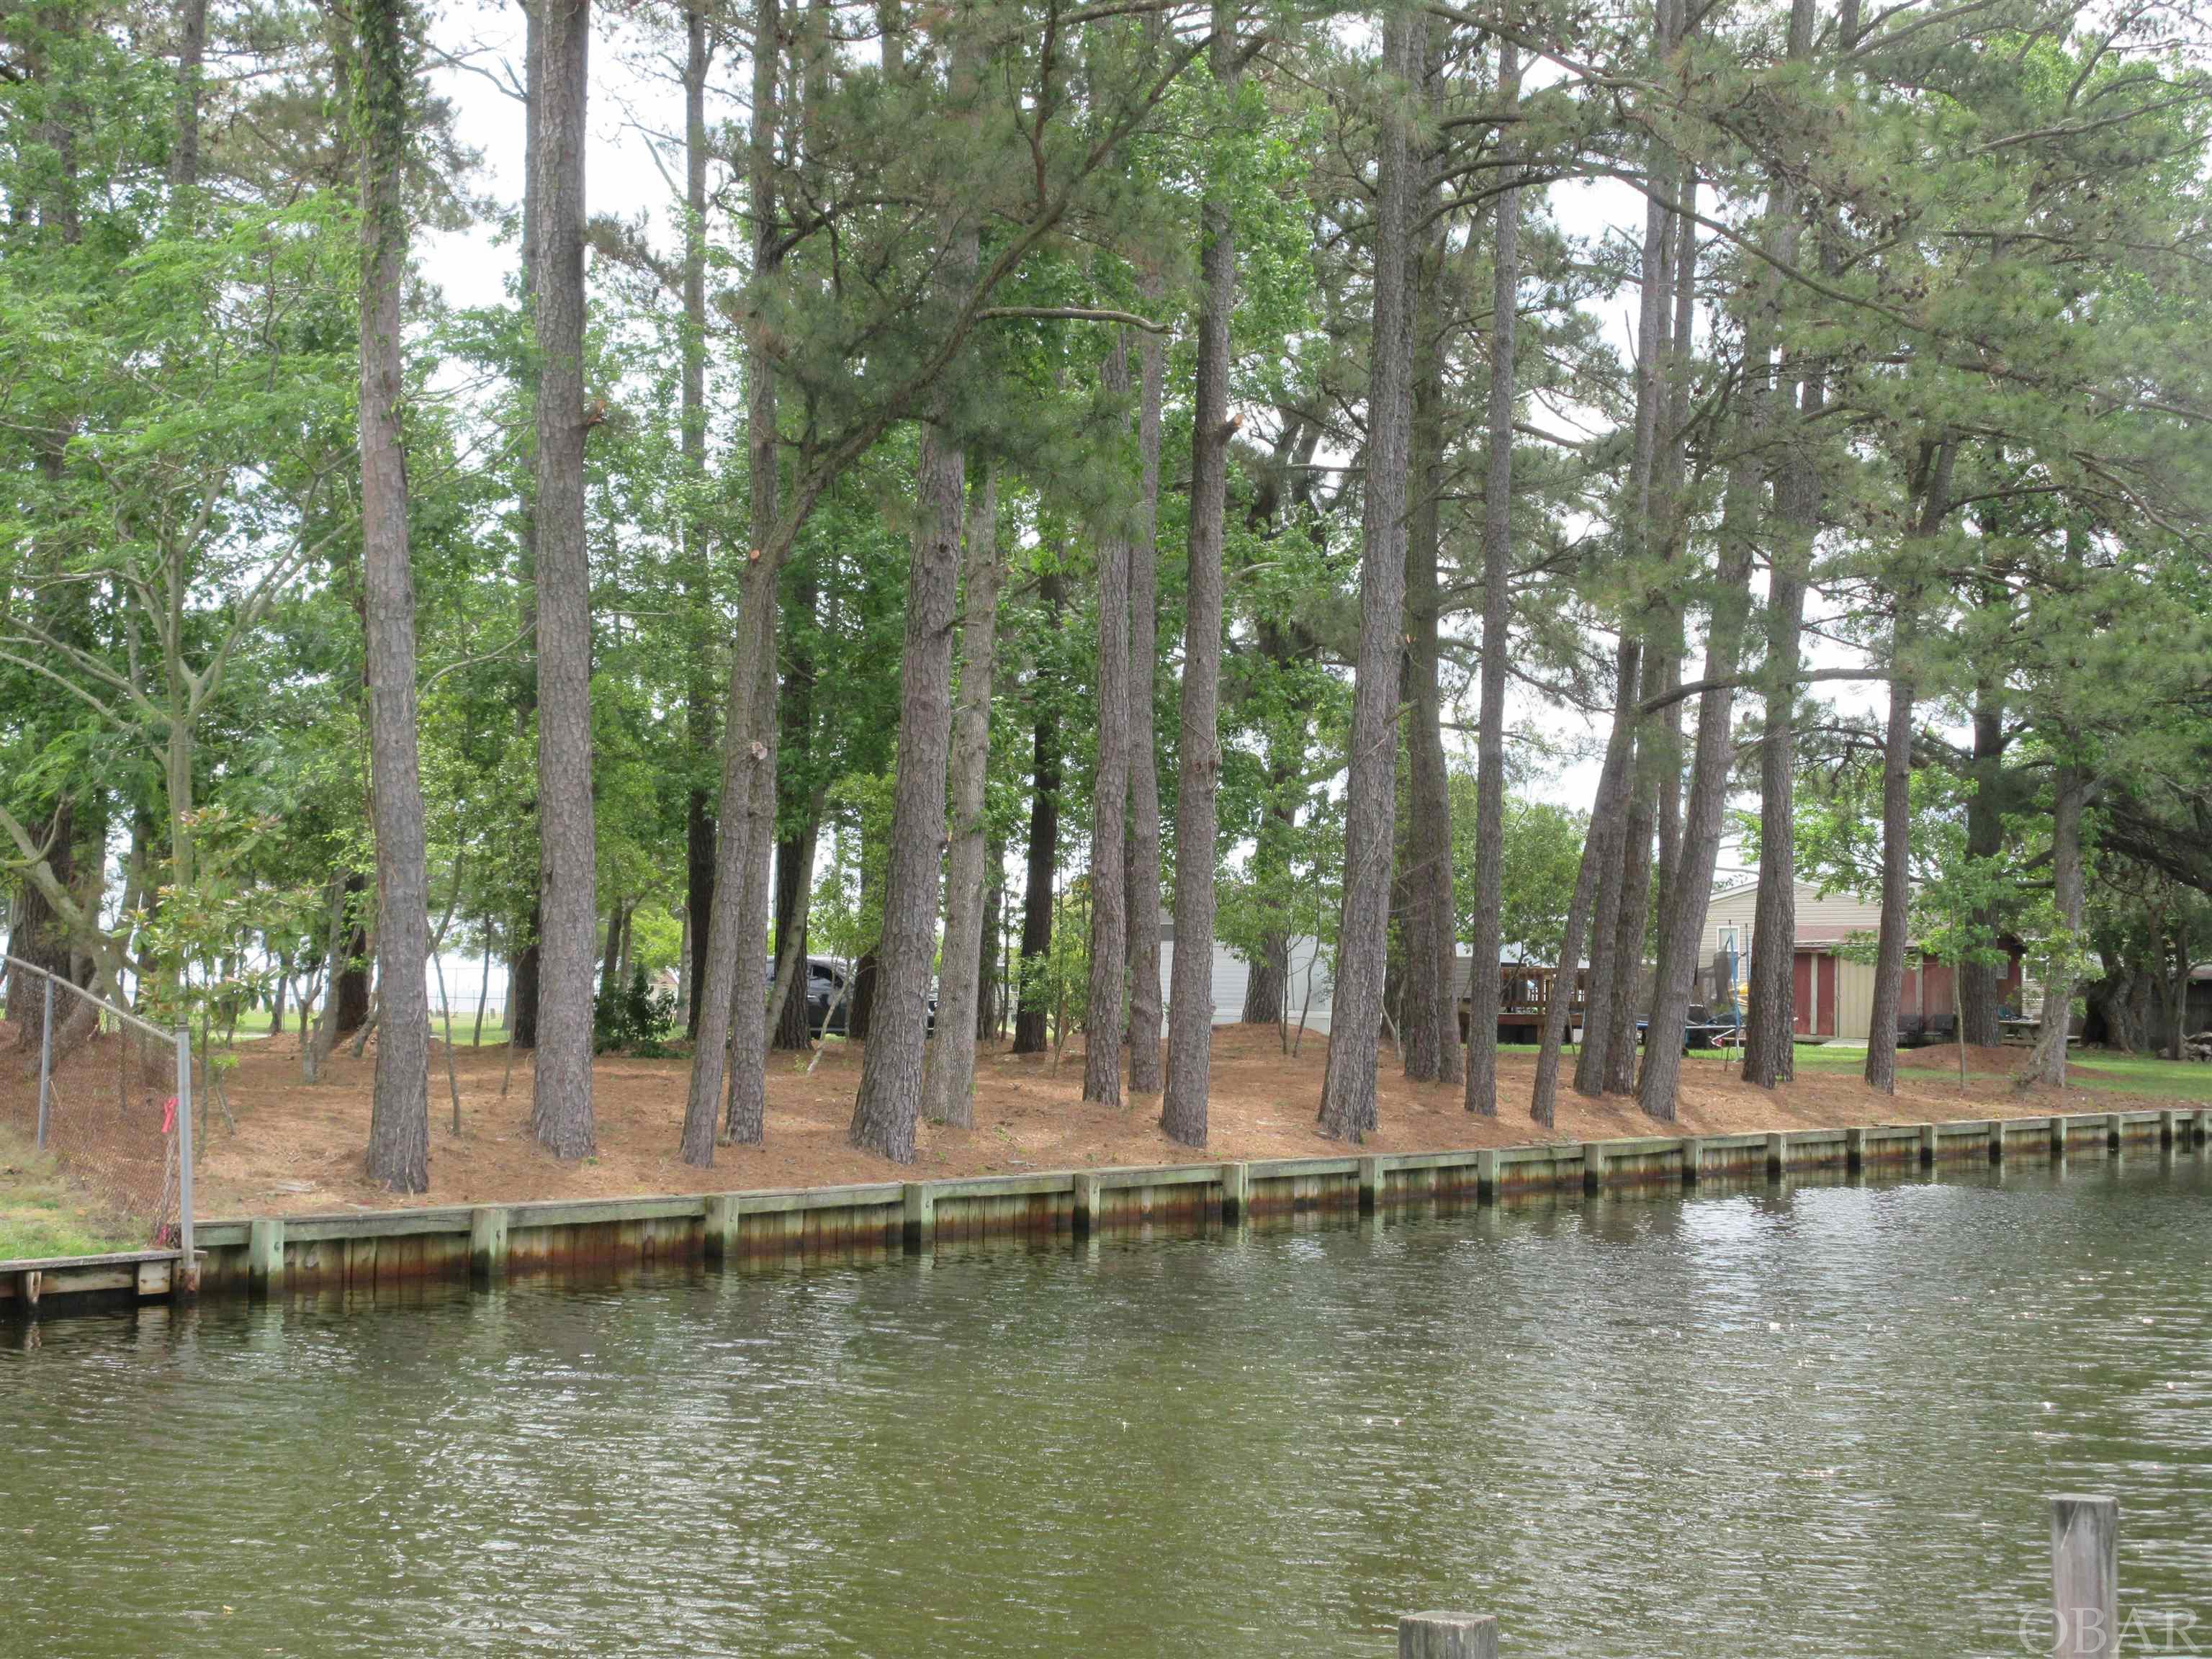 GET THE BEST OF BOTH WORLDS! Beautiful Water Views of the Currituck Sound overlooking the Barrier Island of the Outer Banks! Located on a Navigable Canal with direct Sound Access from this 150' Bulk Headed Canal front Lot!!  Great Elevation and truly A one of a kind Lot!  Build "your" Dream home and relax in this Waterfront Community, with a PRIVATE WATERFRONT PARK!  If you like boating this is you!  See this GREAT LOCATION  for an enjoyable Day on the water! Direct sound access from this lot provides you several Waterfront Restaurants nearby to enjoy, Barry's Restaurant is a short ride on the same side! Take a Day Trip and Explore the Island! Located 16.9 Miles by automobile (21 minutes) to Kitty Hawk and the Outer Banks Beaches/OBX! It's easy to enjoy the convenience of living in Grandy with Restaurants & Shopping near by yet only a short drive to Elizabeth City!  Chesapeake Expressway gets you there too!  Definitely a great spot to land if your a water lover!   Please call or Text when showing, this is a  Neighborhood Watch Community.  See this Lot TODAY!